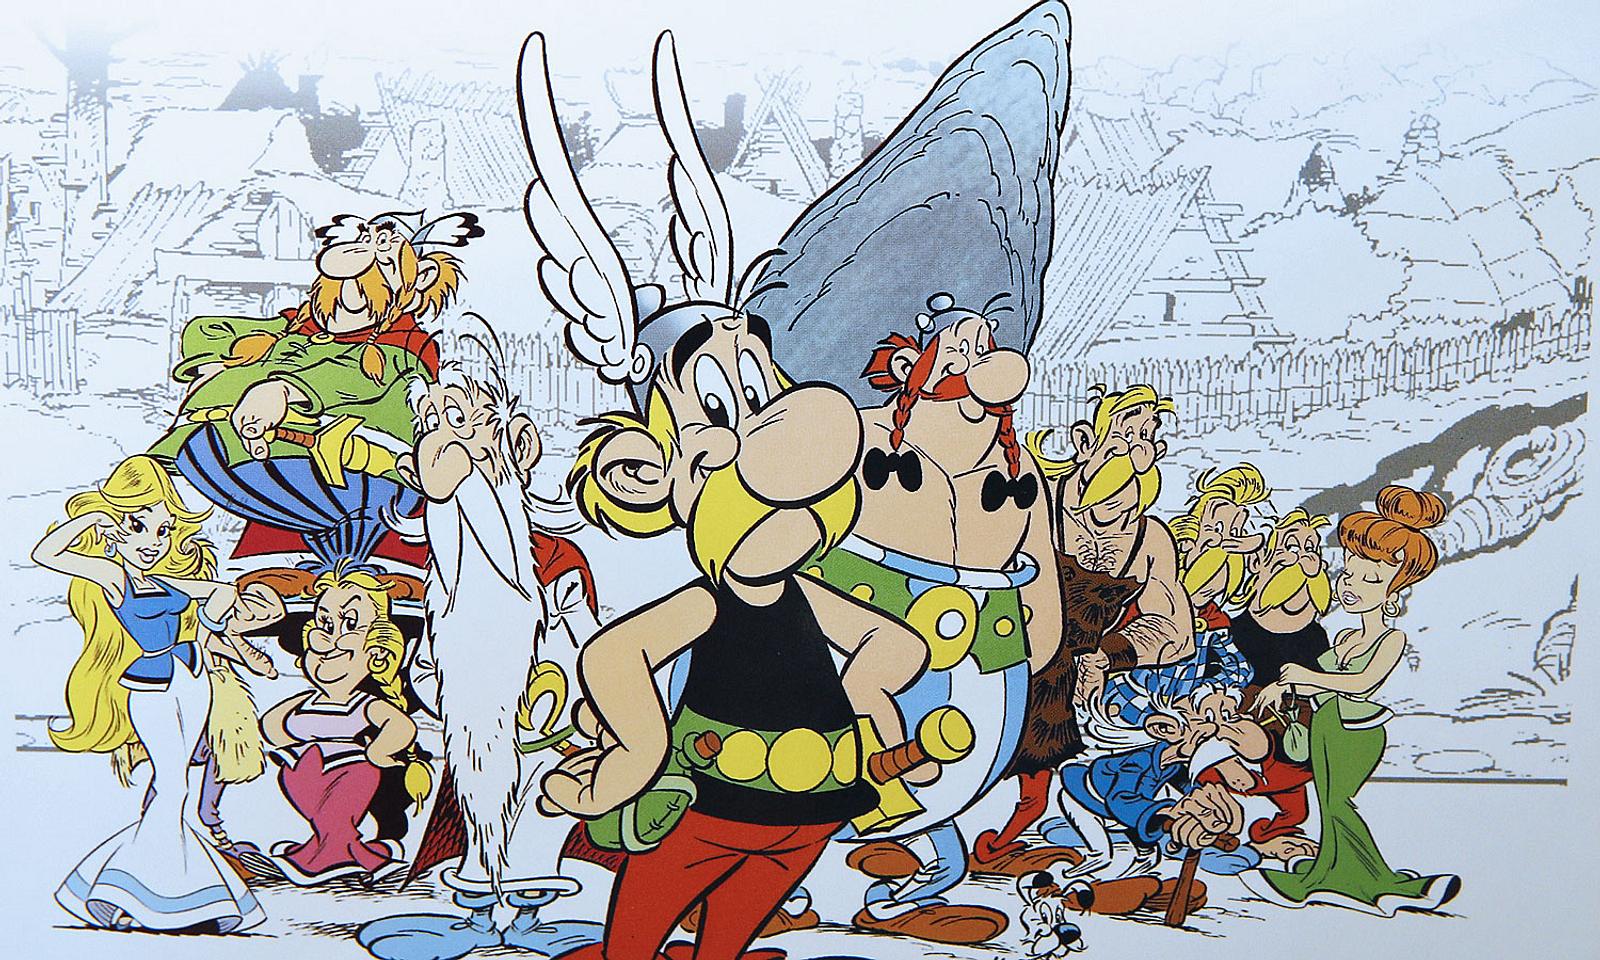 Adelaide asterix